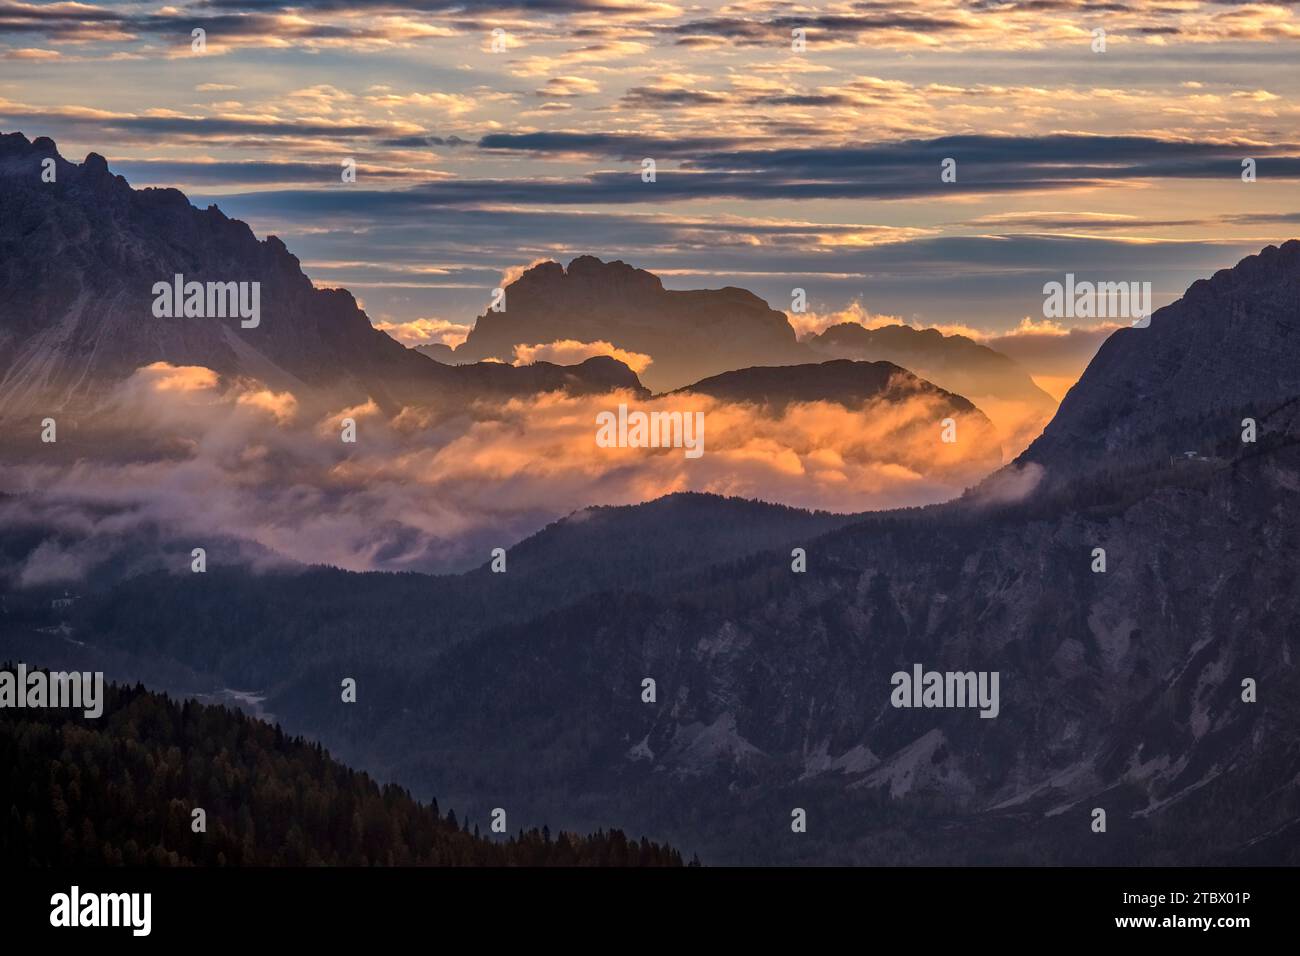 The rock formation Croda da Campo in the distance, the valley covered in clouds at sunrise in autumn, seen from Passo Falzarego. Stock Photo